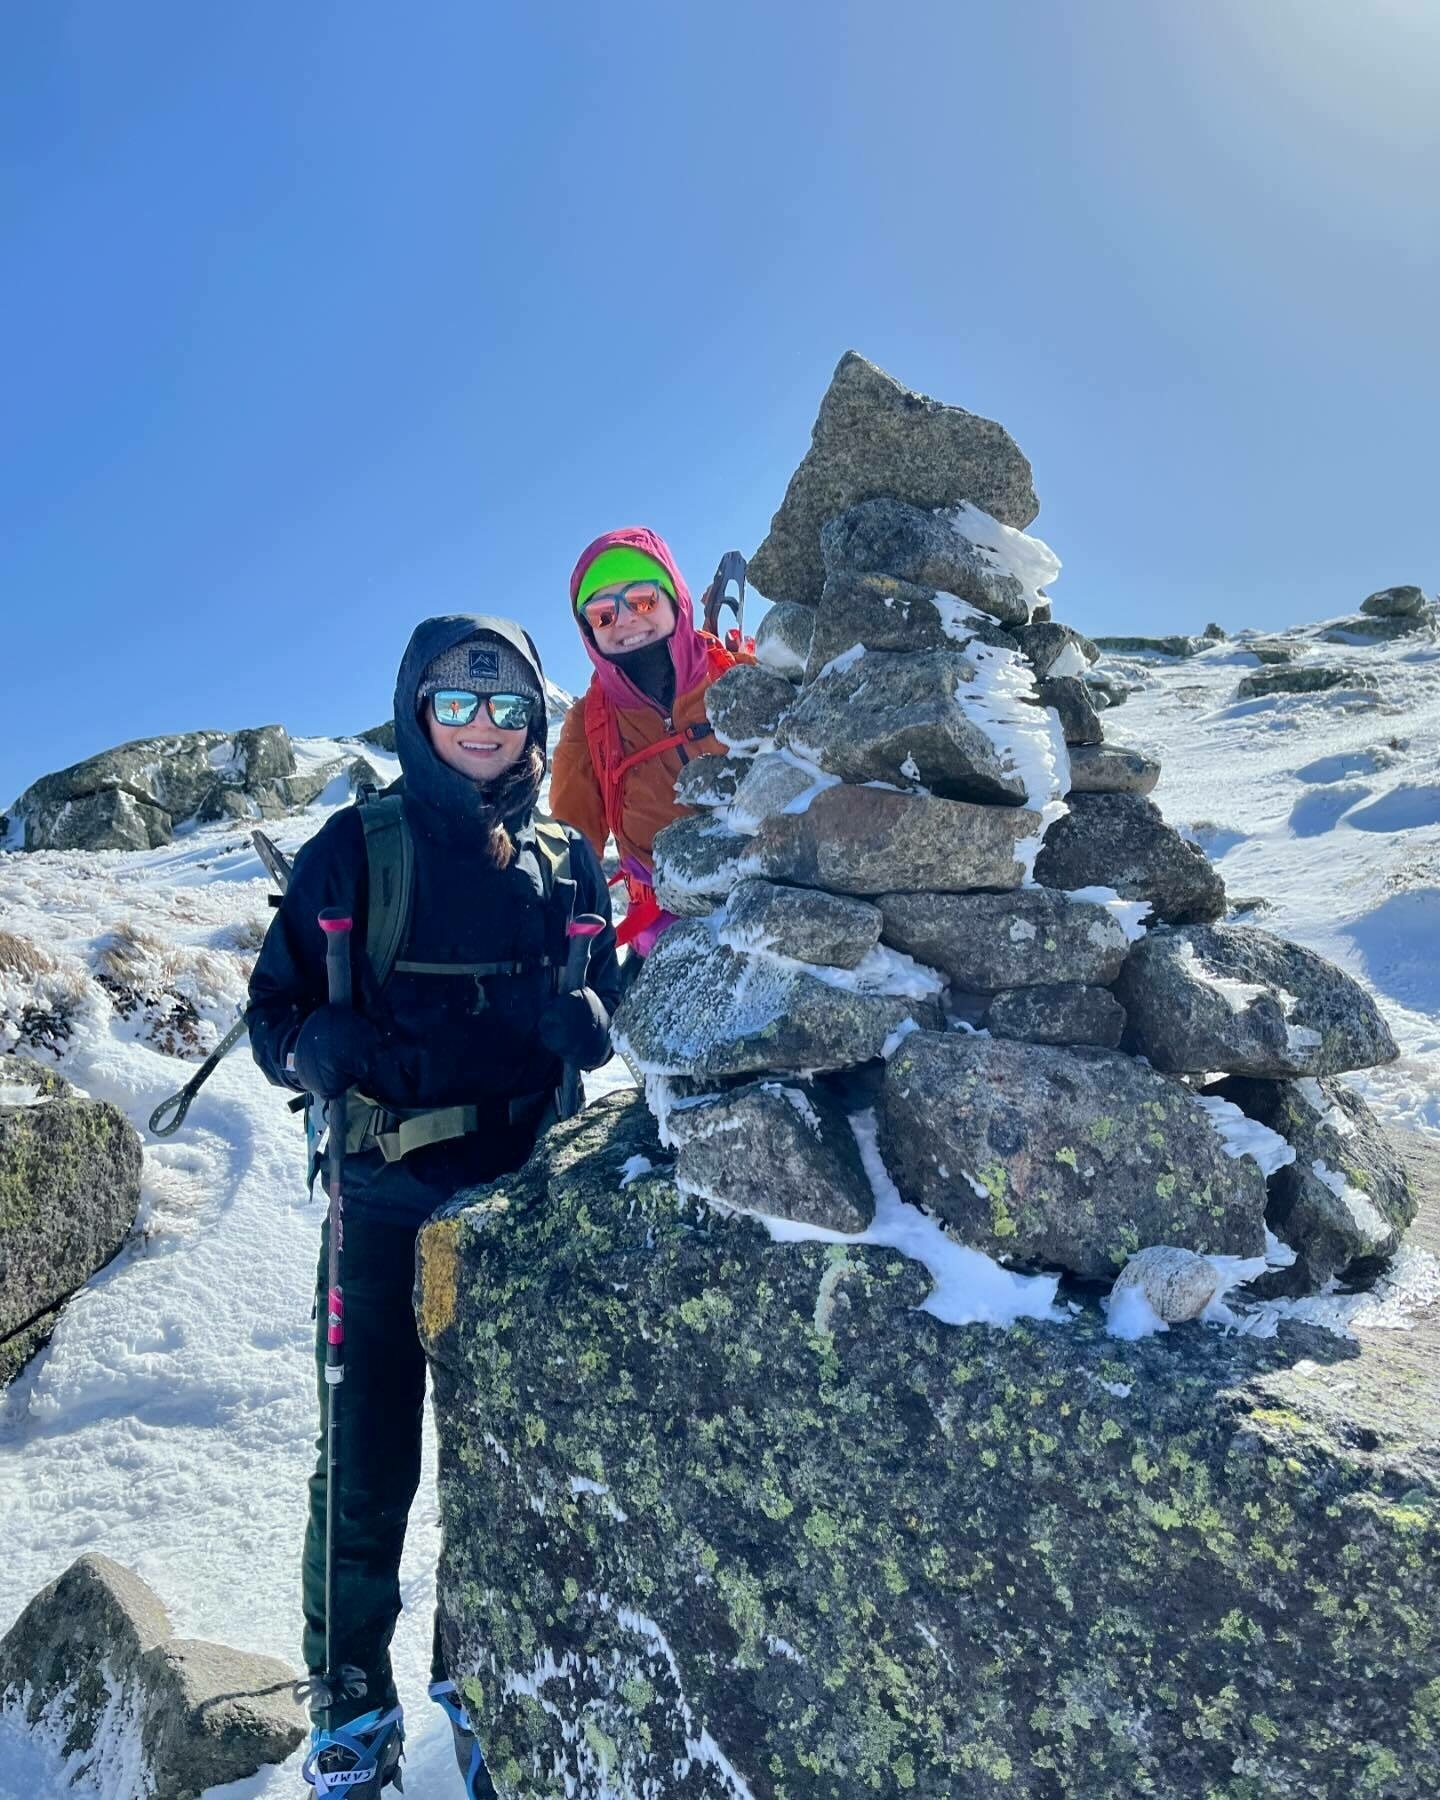 Two individuals are posing behind a cairn on a sunny, snow-covered mountain. They are dressed in vibrant cold-weather gear, with hiking equipment.